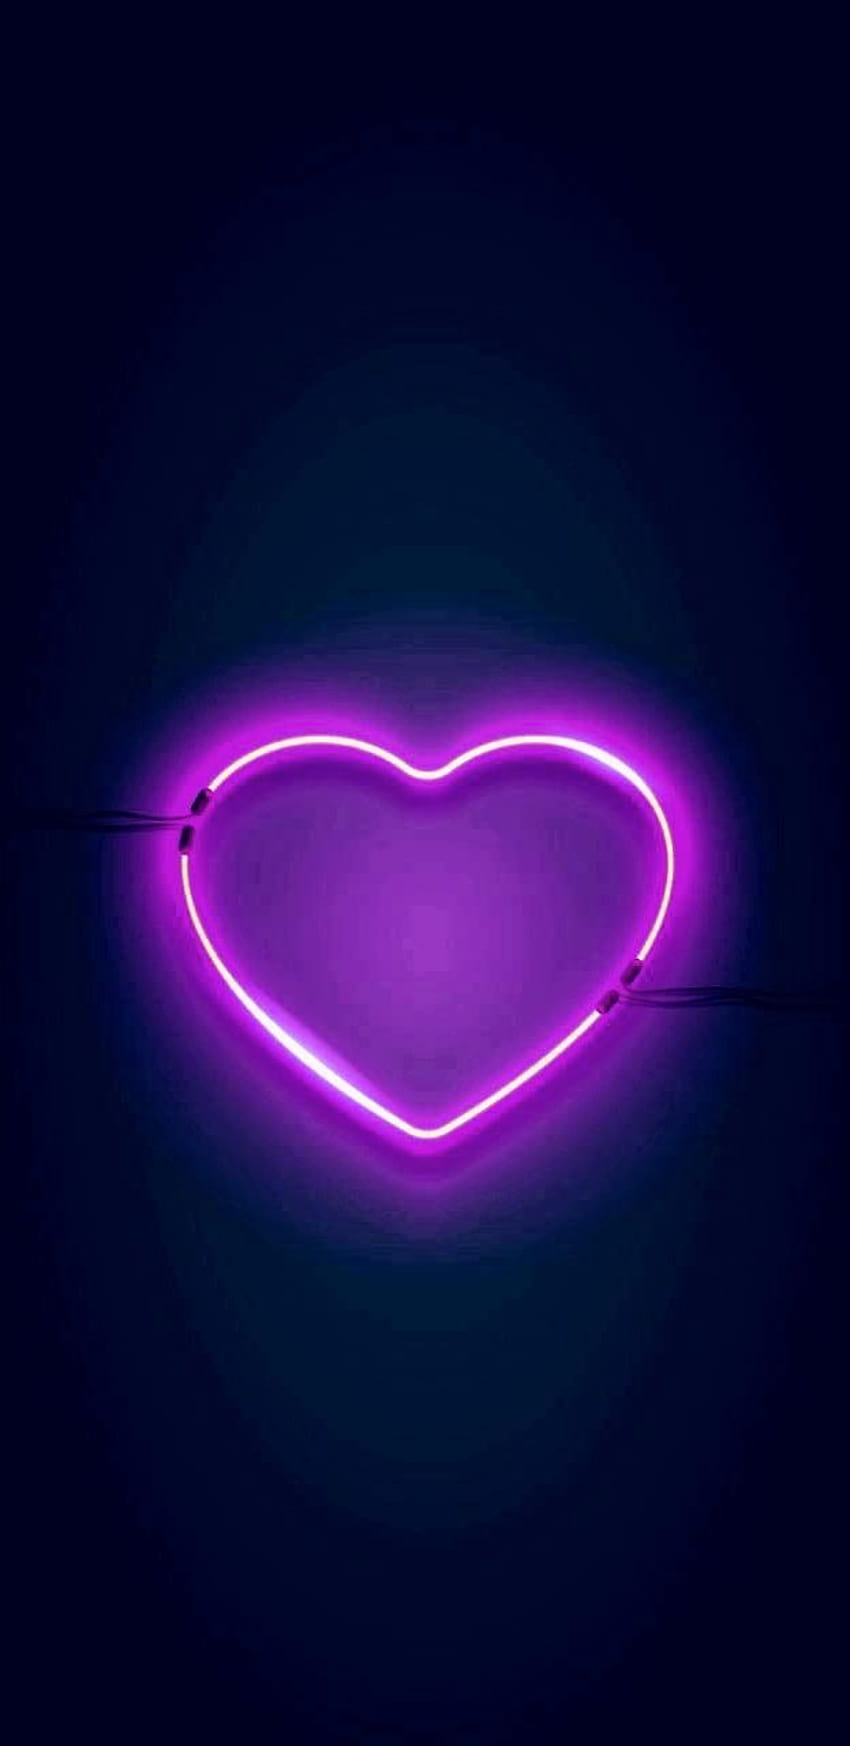 Mobile and   Neon  iPhone tumblr aesthetic Neon Heart HD phone wallpaper   Pxfuel